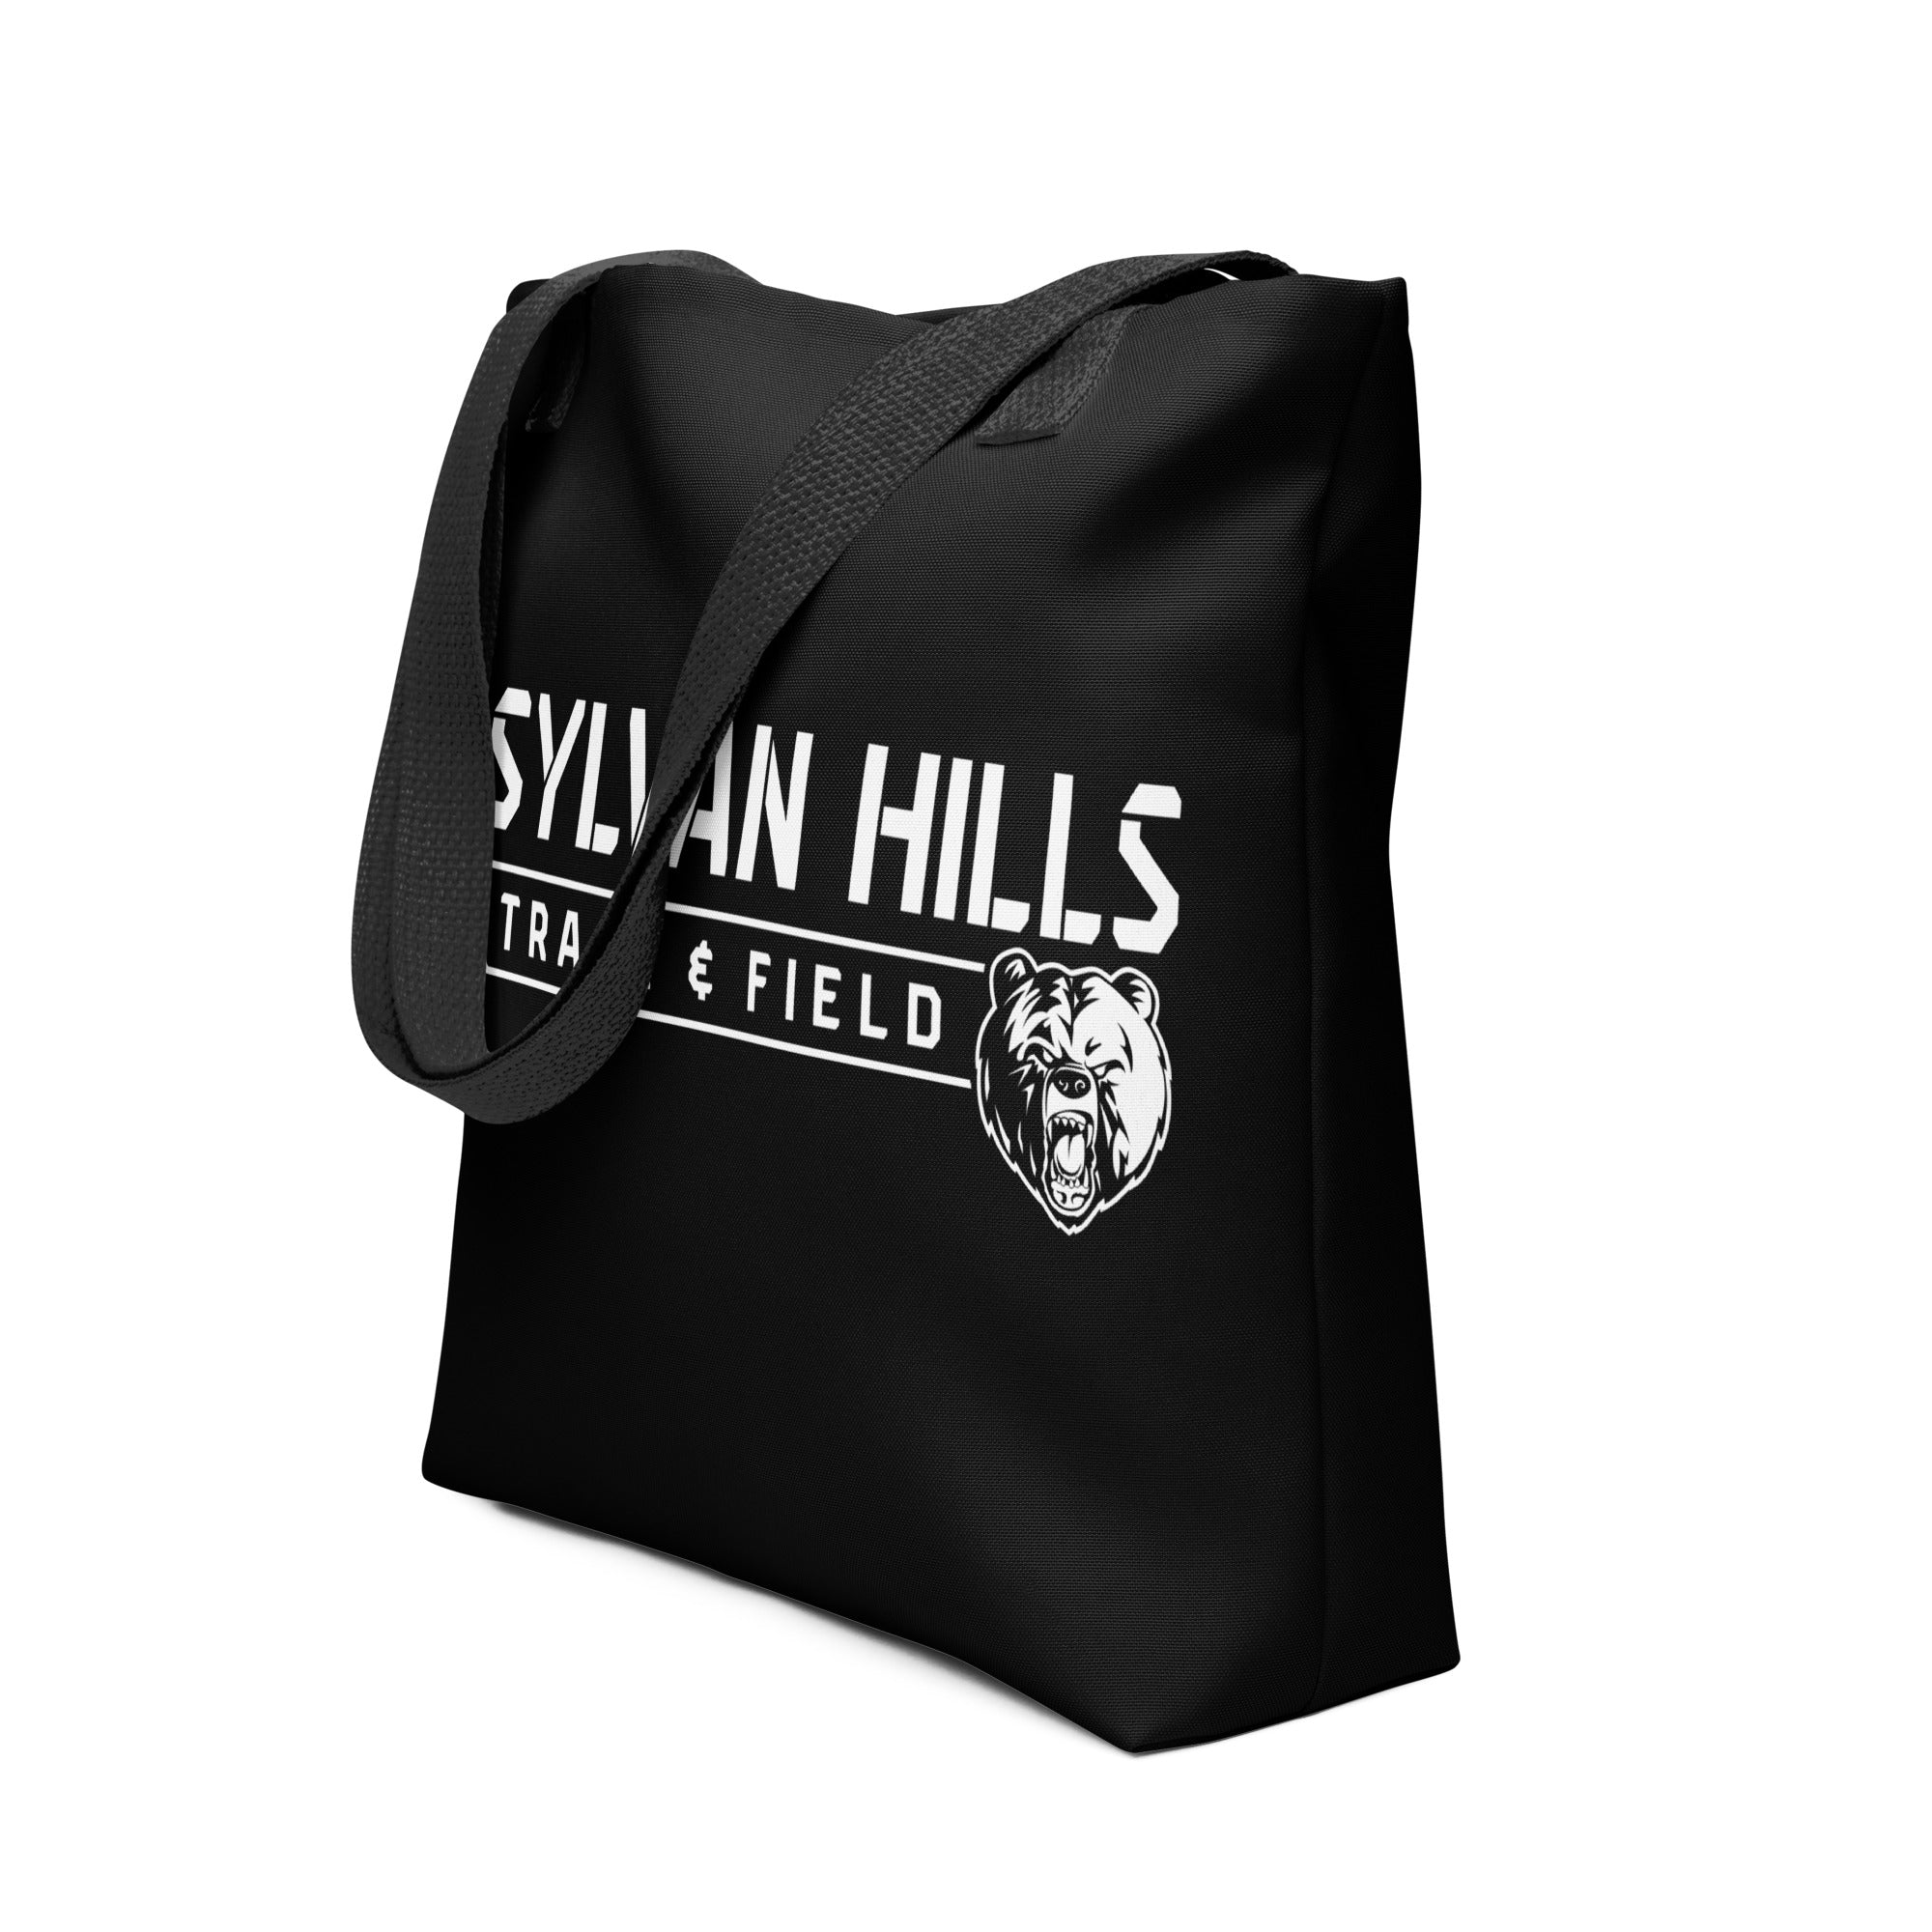 Sylvan Hills Track and Field All Over Print Tote